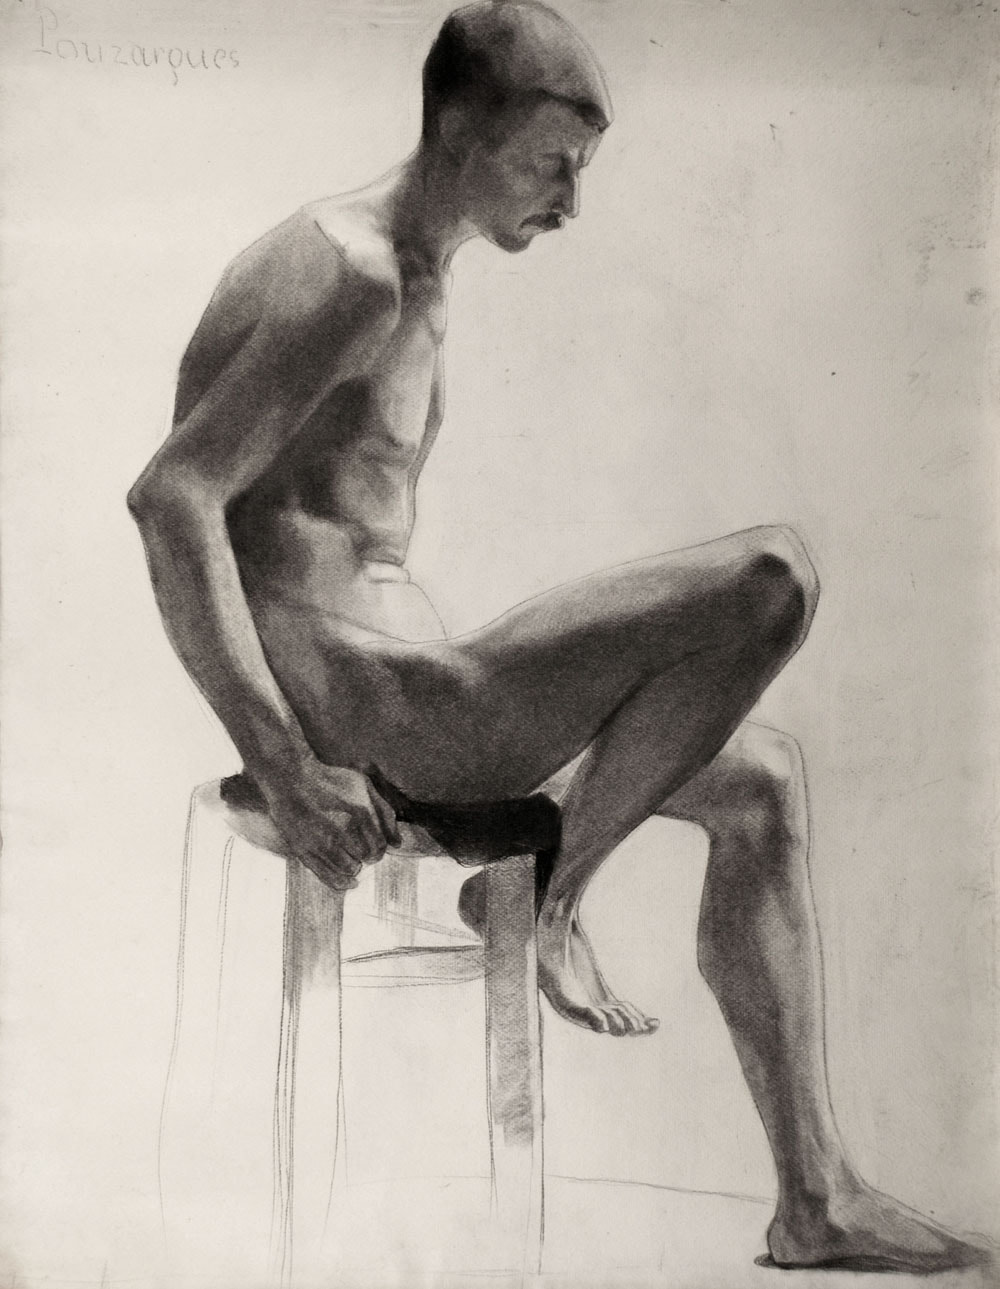 Lucien-Paul Pouzargues drawing seated male nude